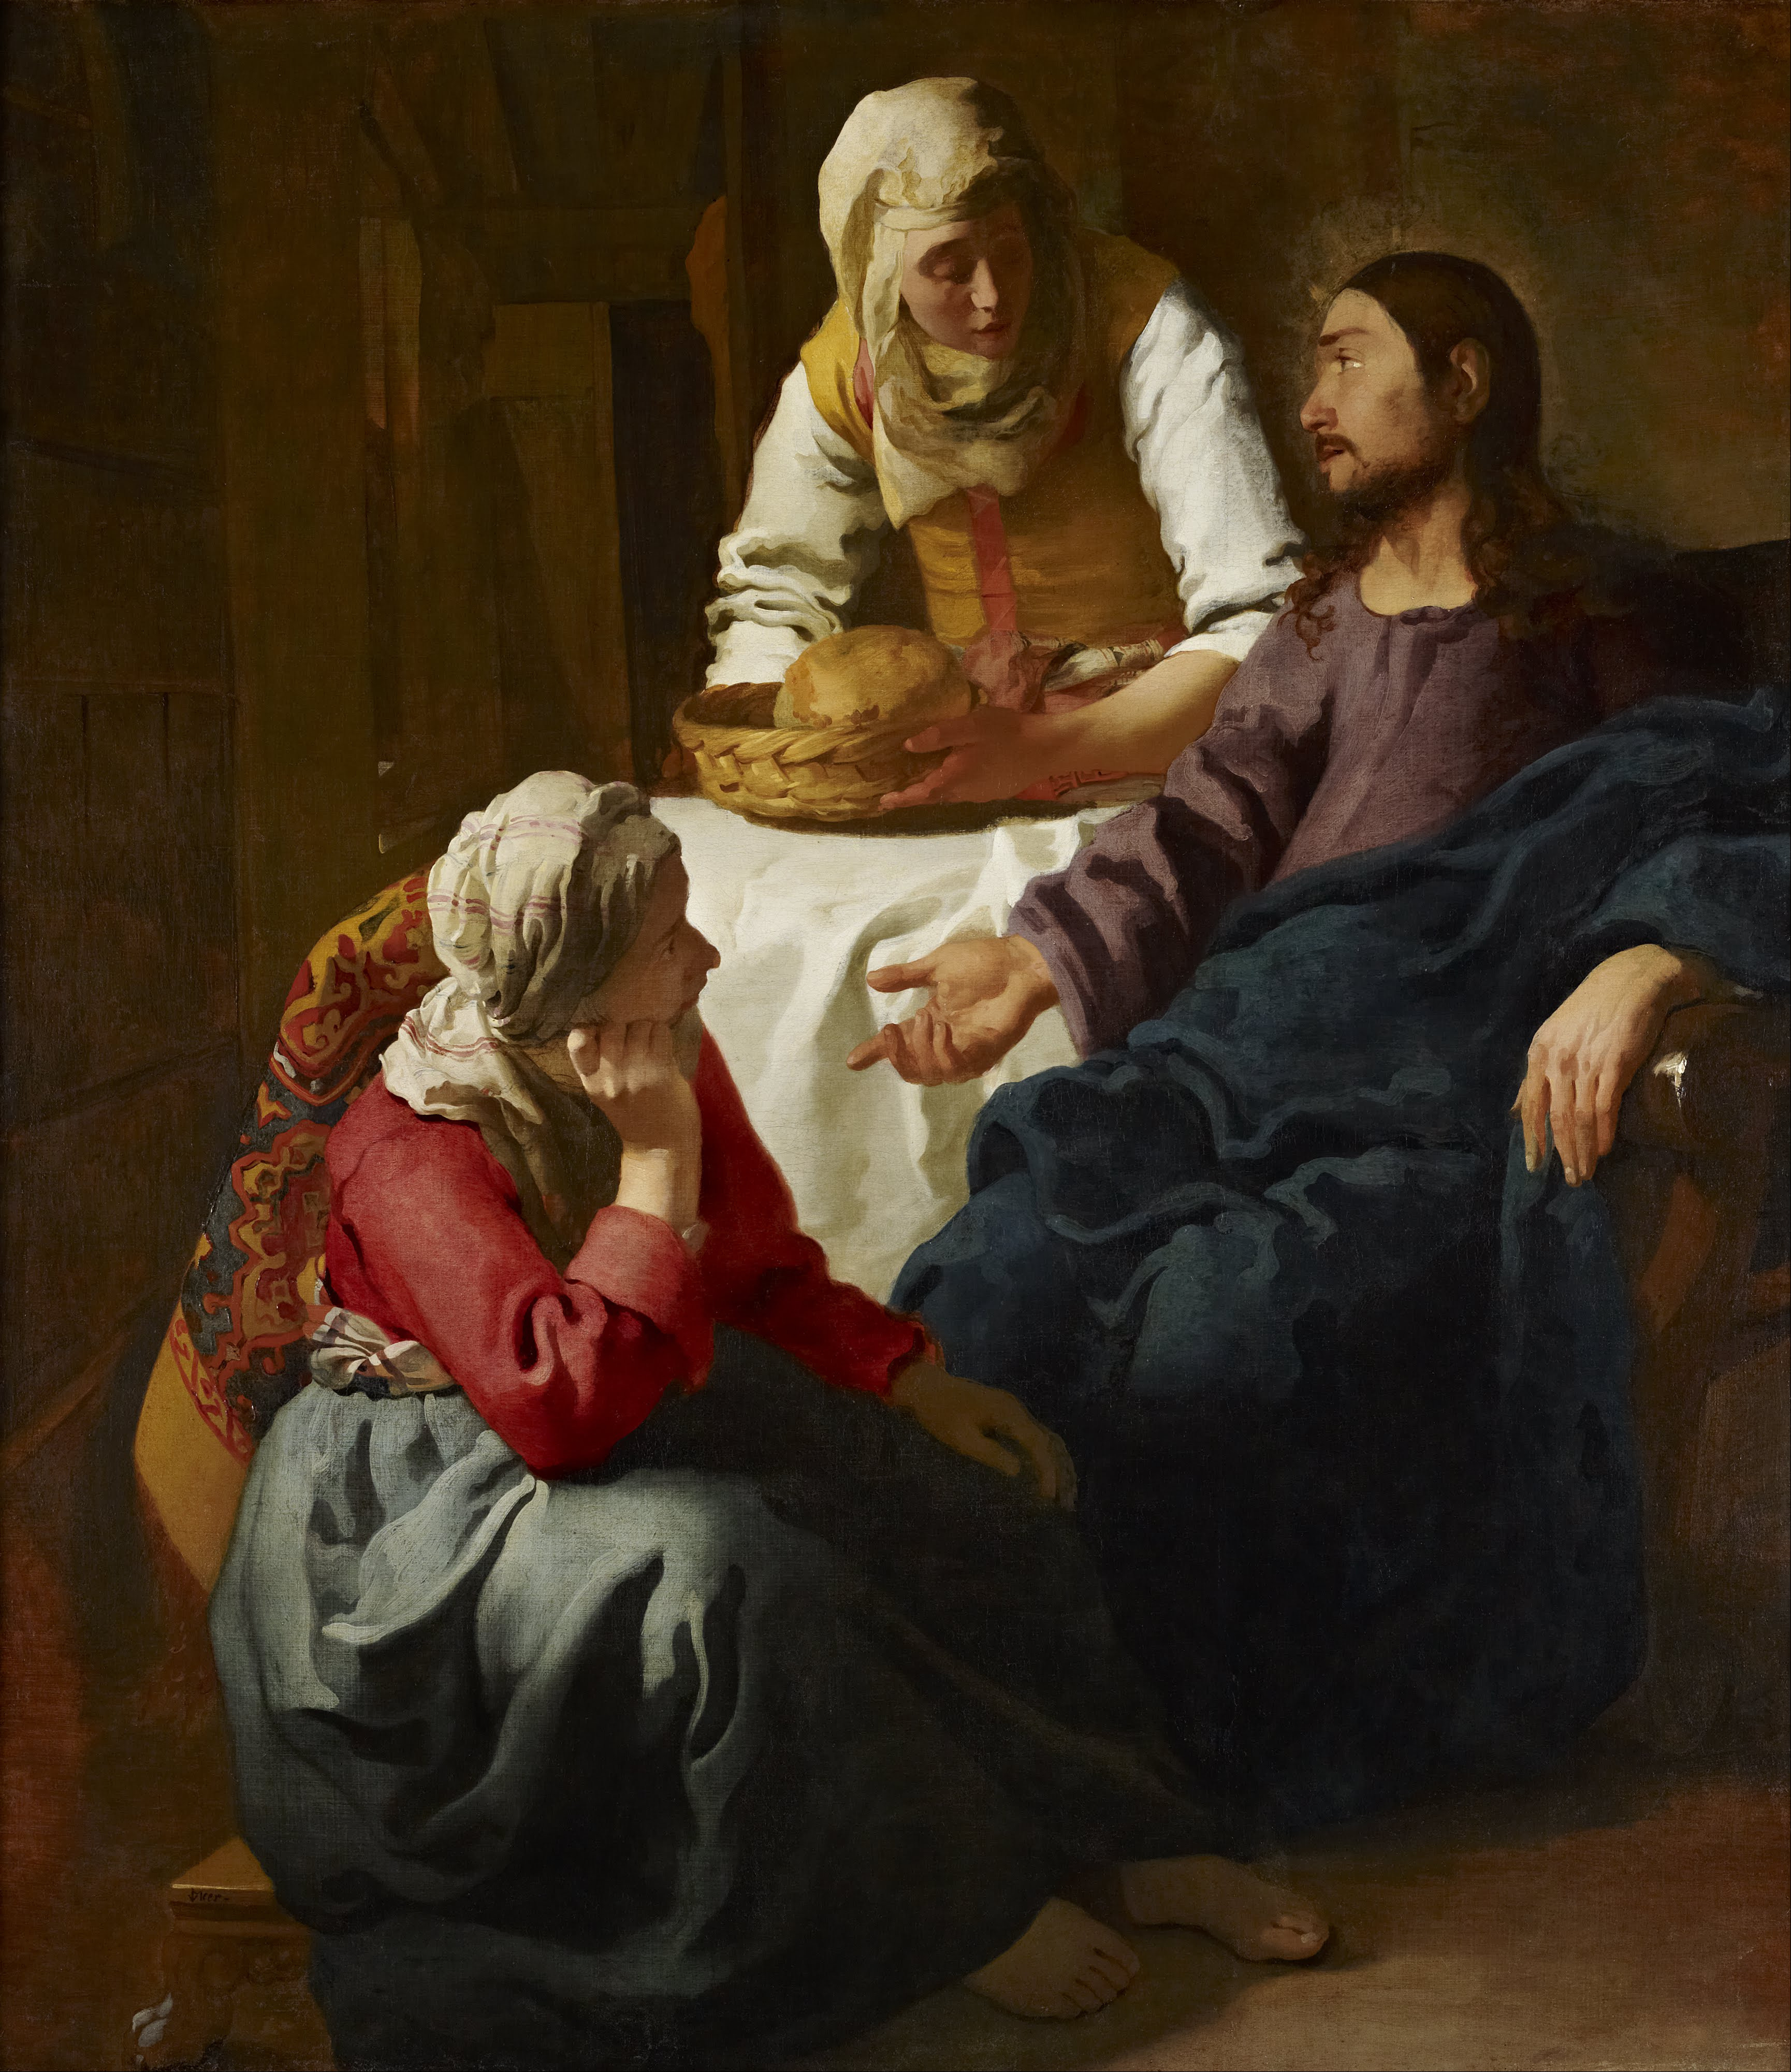 Christ in the House of Mary and Martha by Vermeer, c.1655